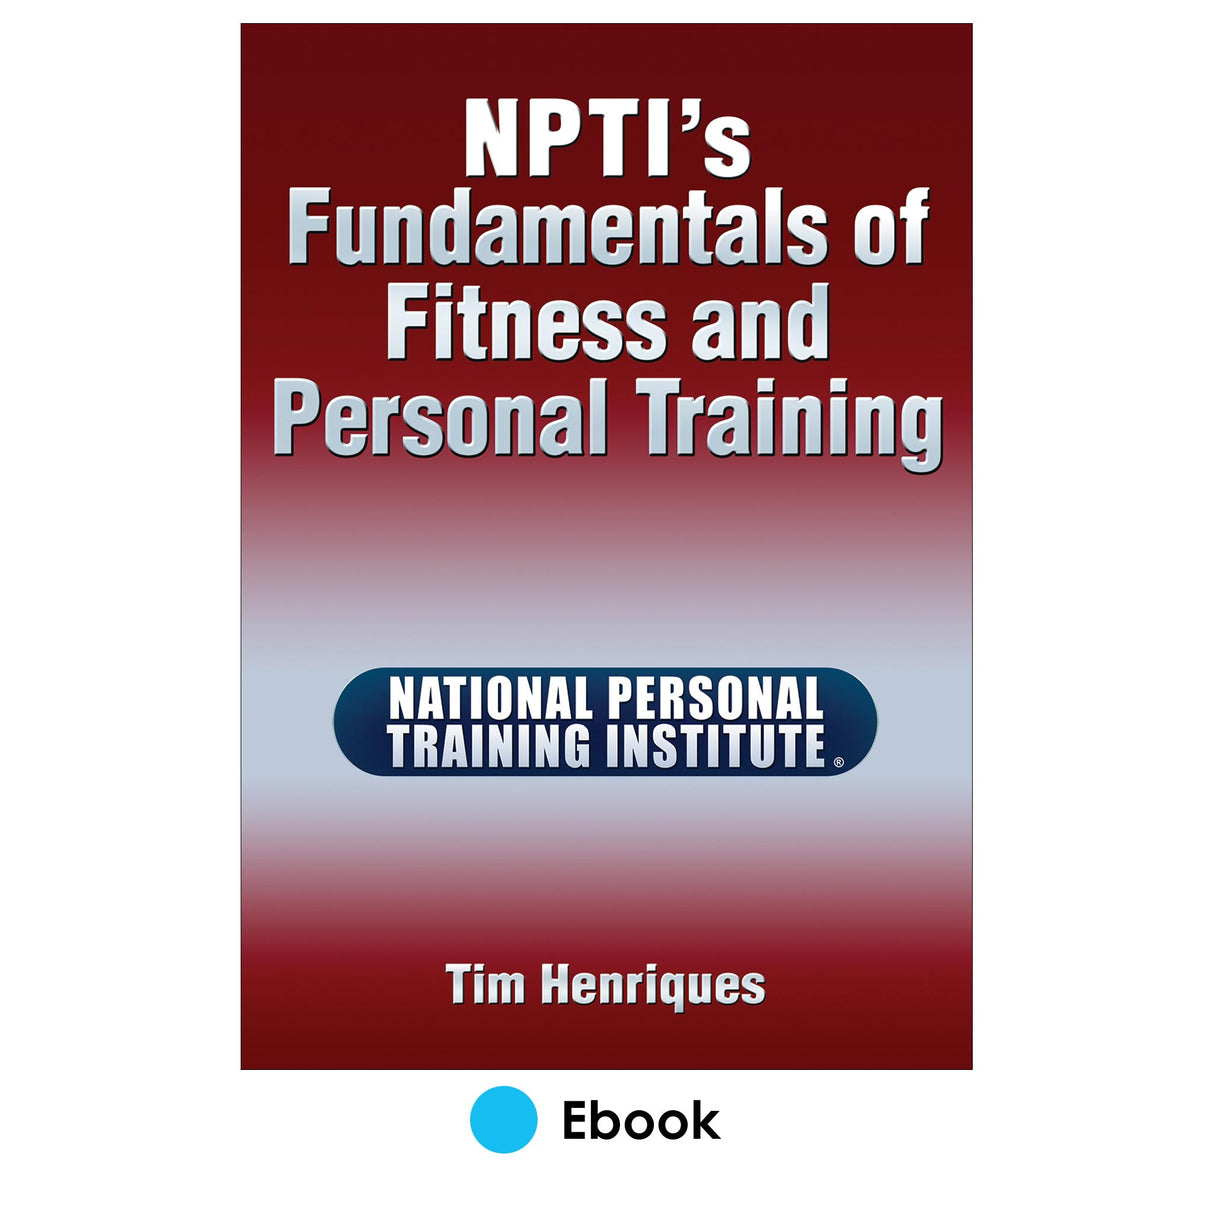 NPTI’s Fundamentals of Fitness and Personal Training PDF